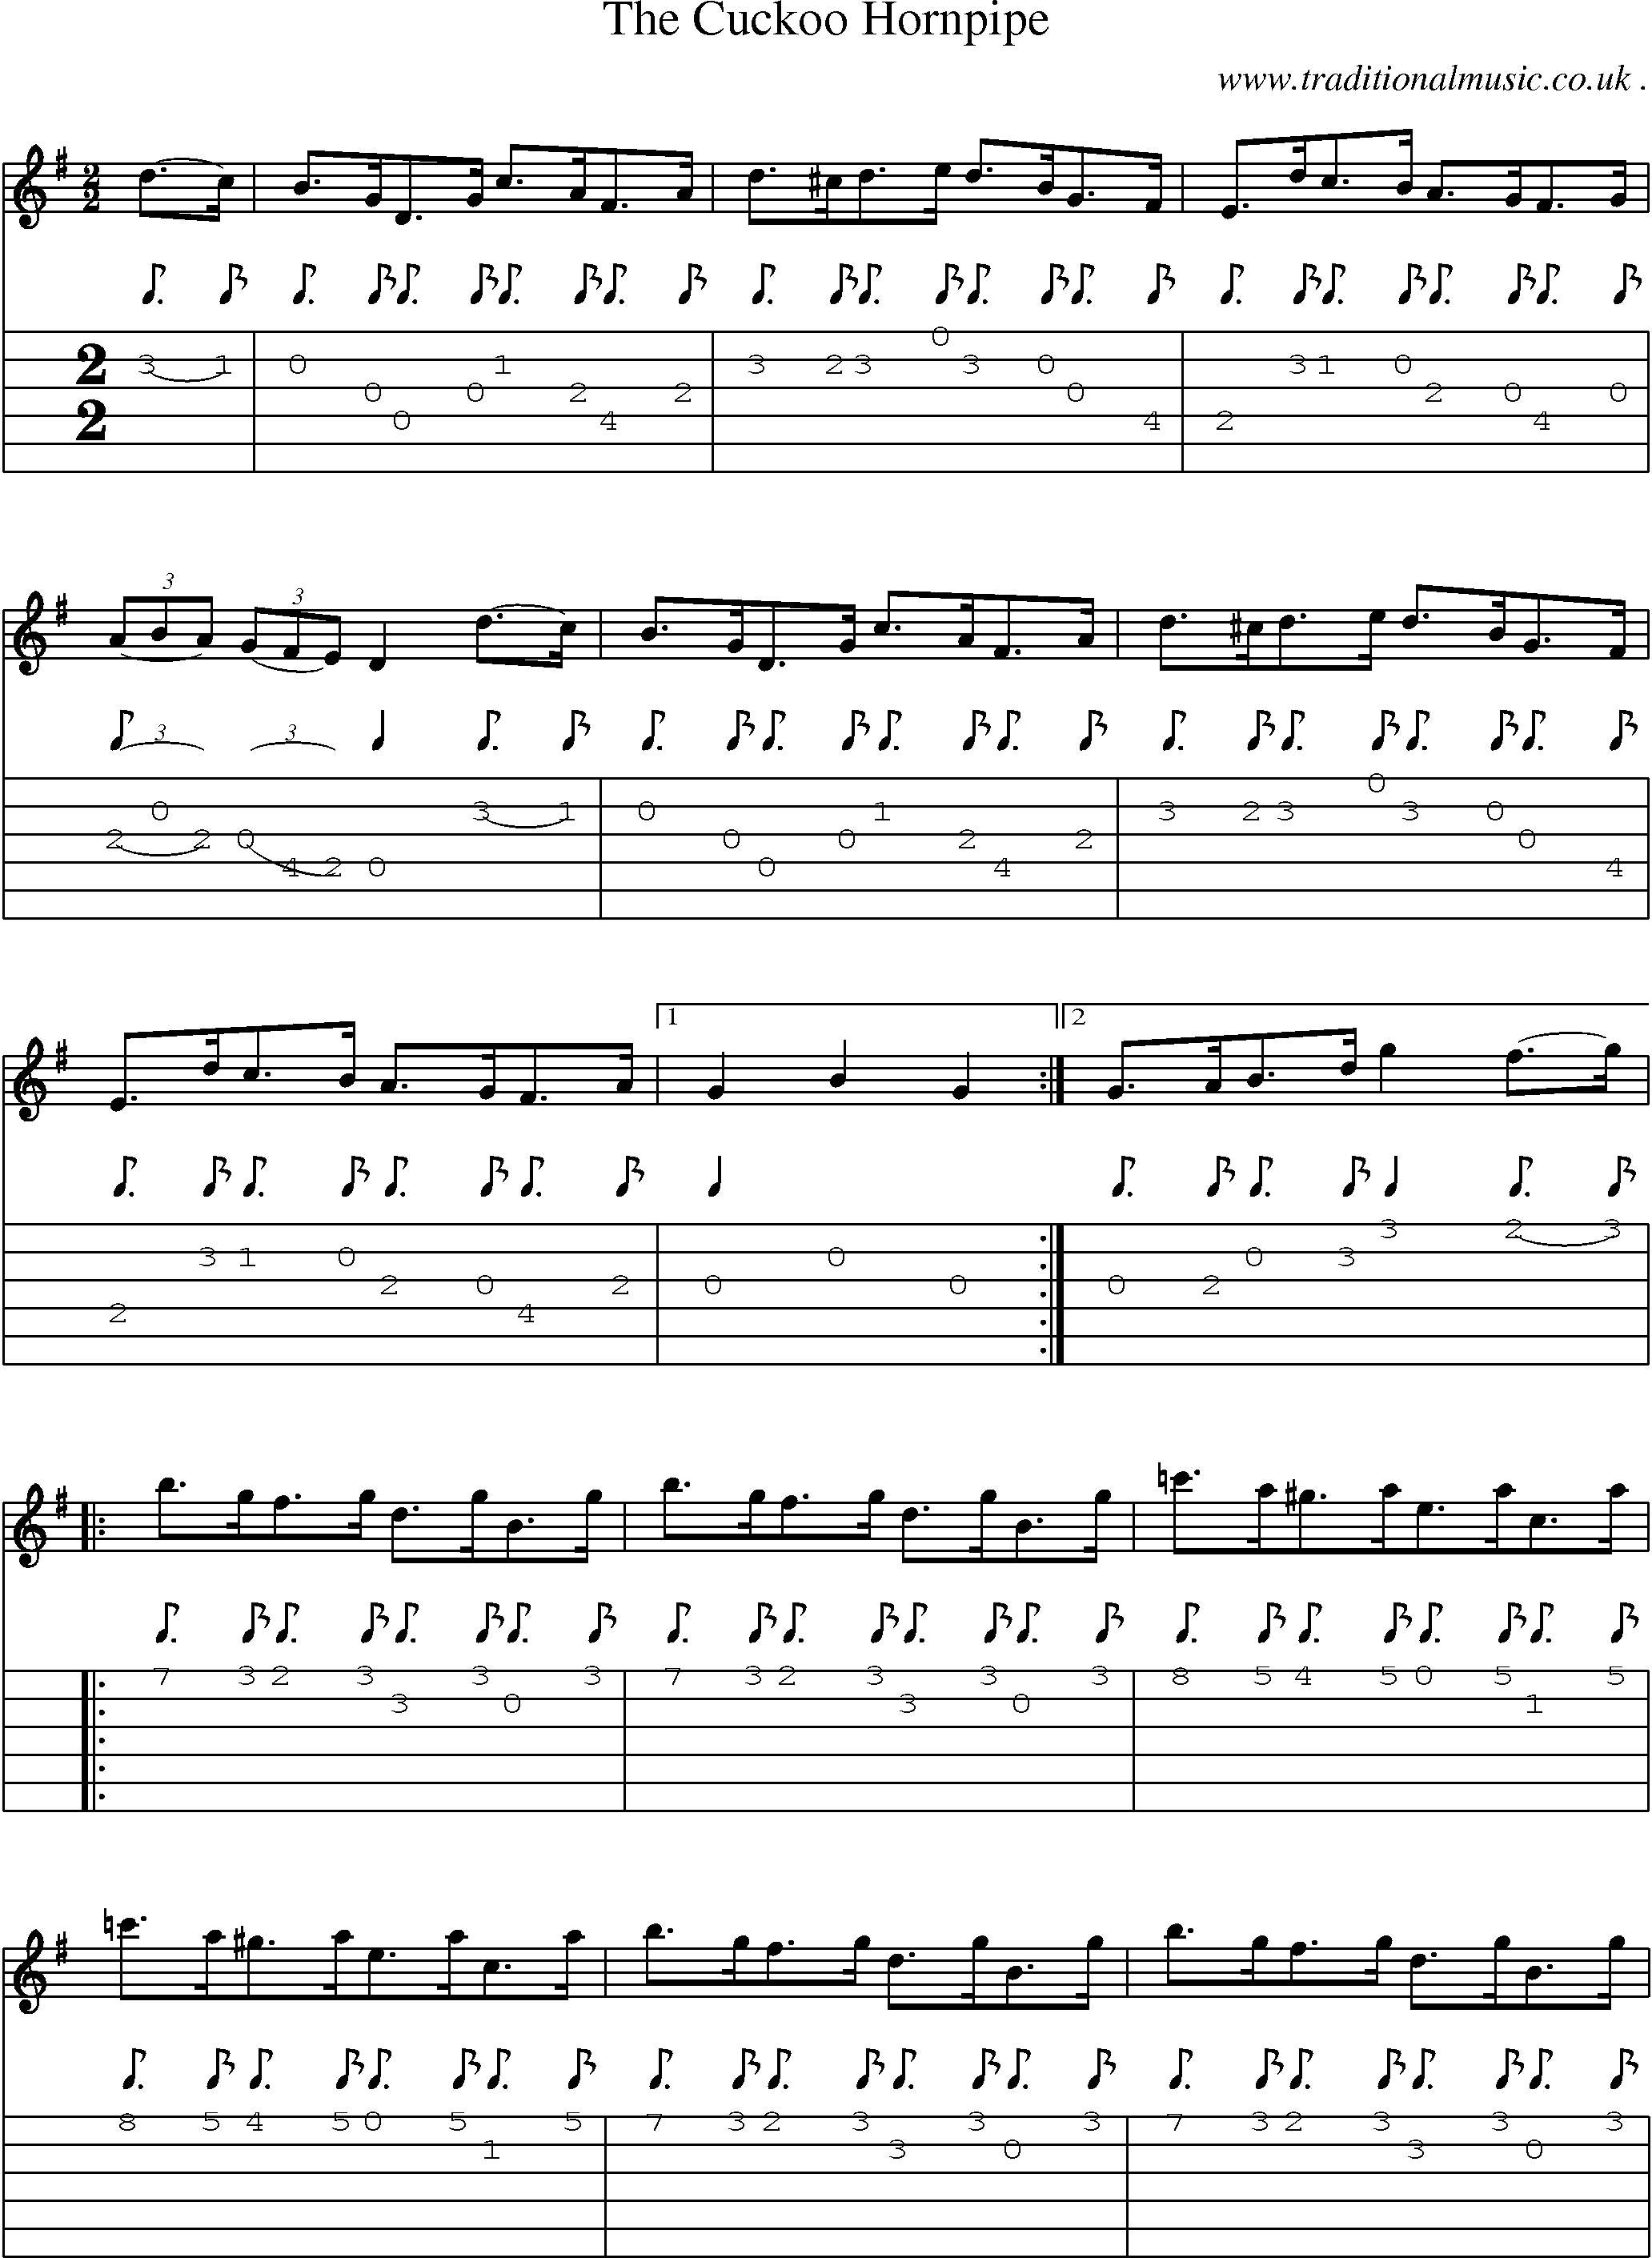 Sheet-Music and Guitar Tabs for The Cuckoo Hornpipe